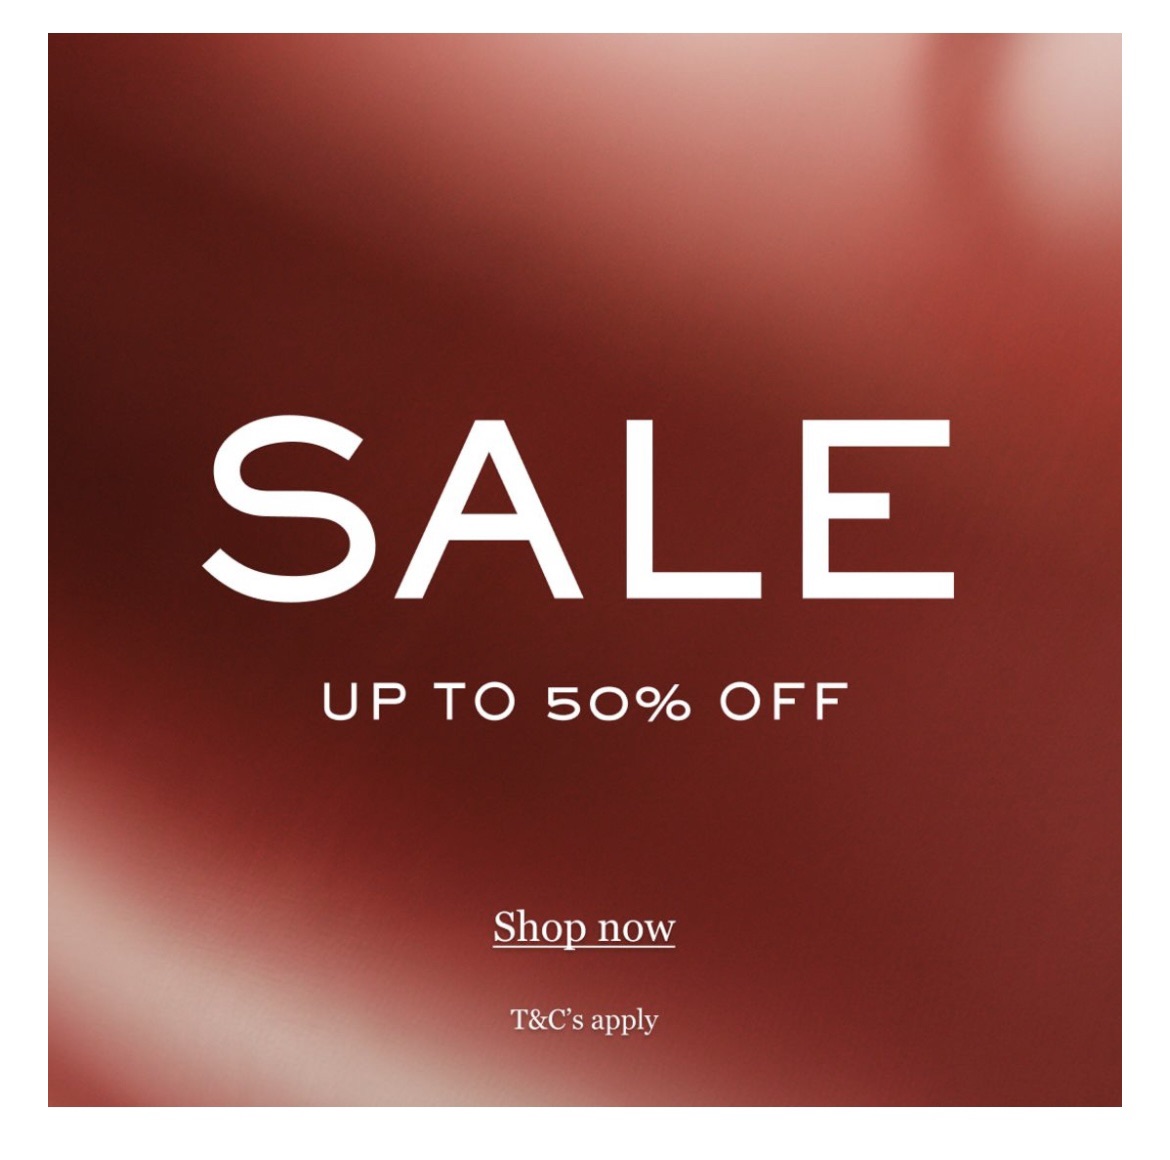 The MR PORTER Sale starts now up to 50% off.